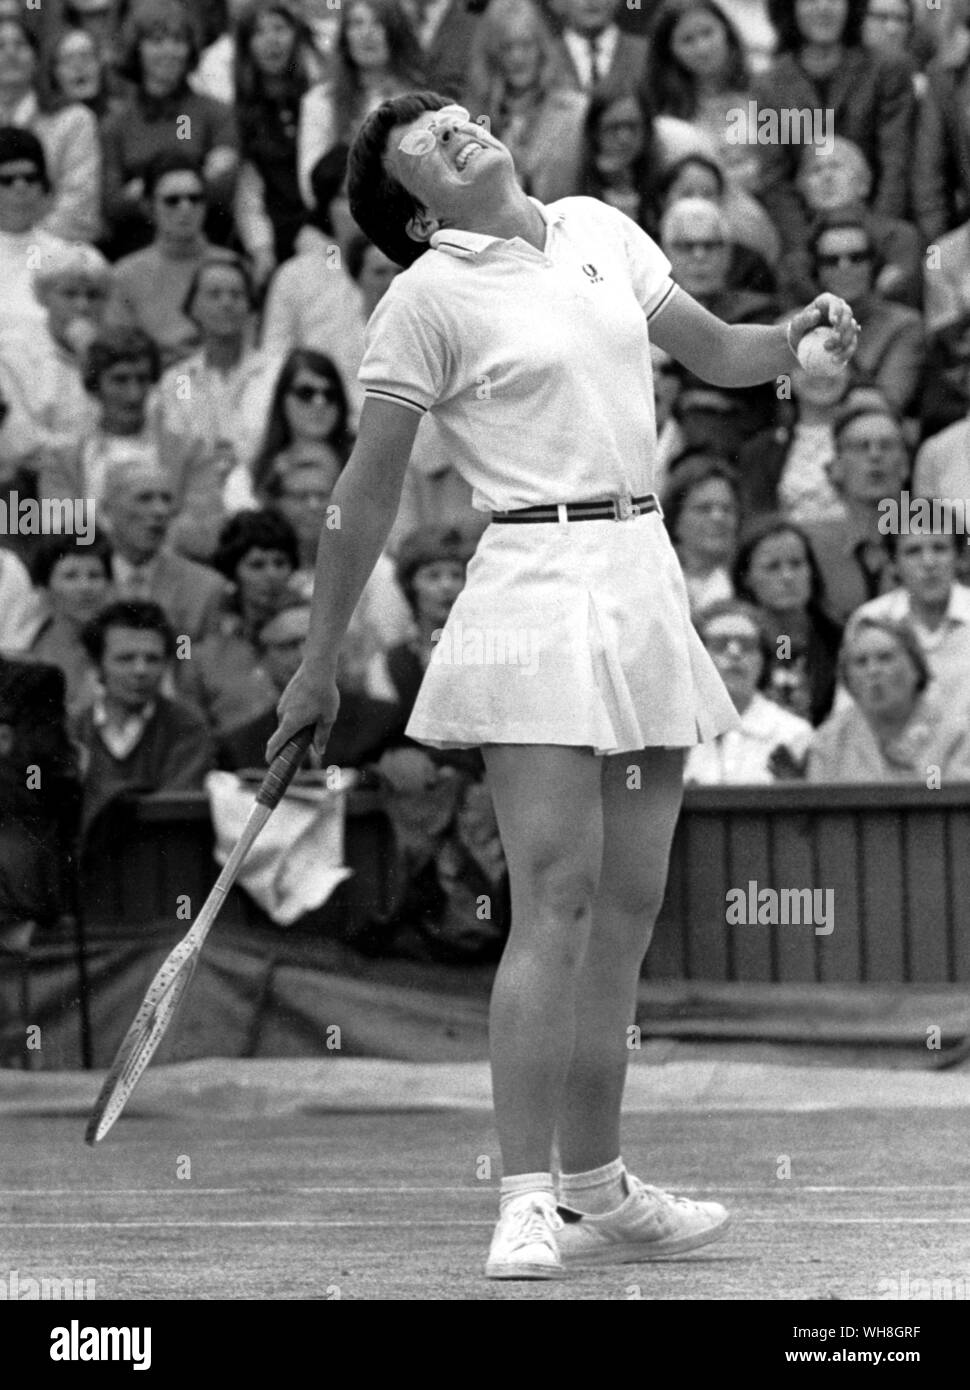 Billie Jean King. A pass that hurt. During her career, she won 12 Grand Slam singles titles, 14 Grand Slam women's doubles titles, and 11 Grand Slam mixed doubles titles. She is generally considered to be one of the greatest tennis players and female athletes in history. The Encyclopedia of Tennis page 162. Stock Photo